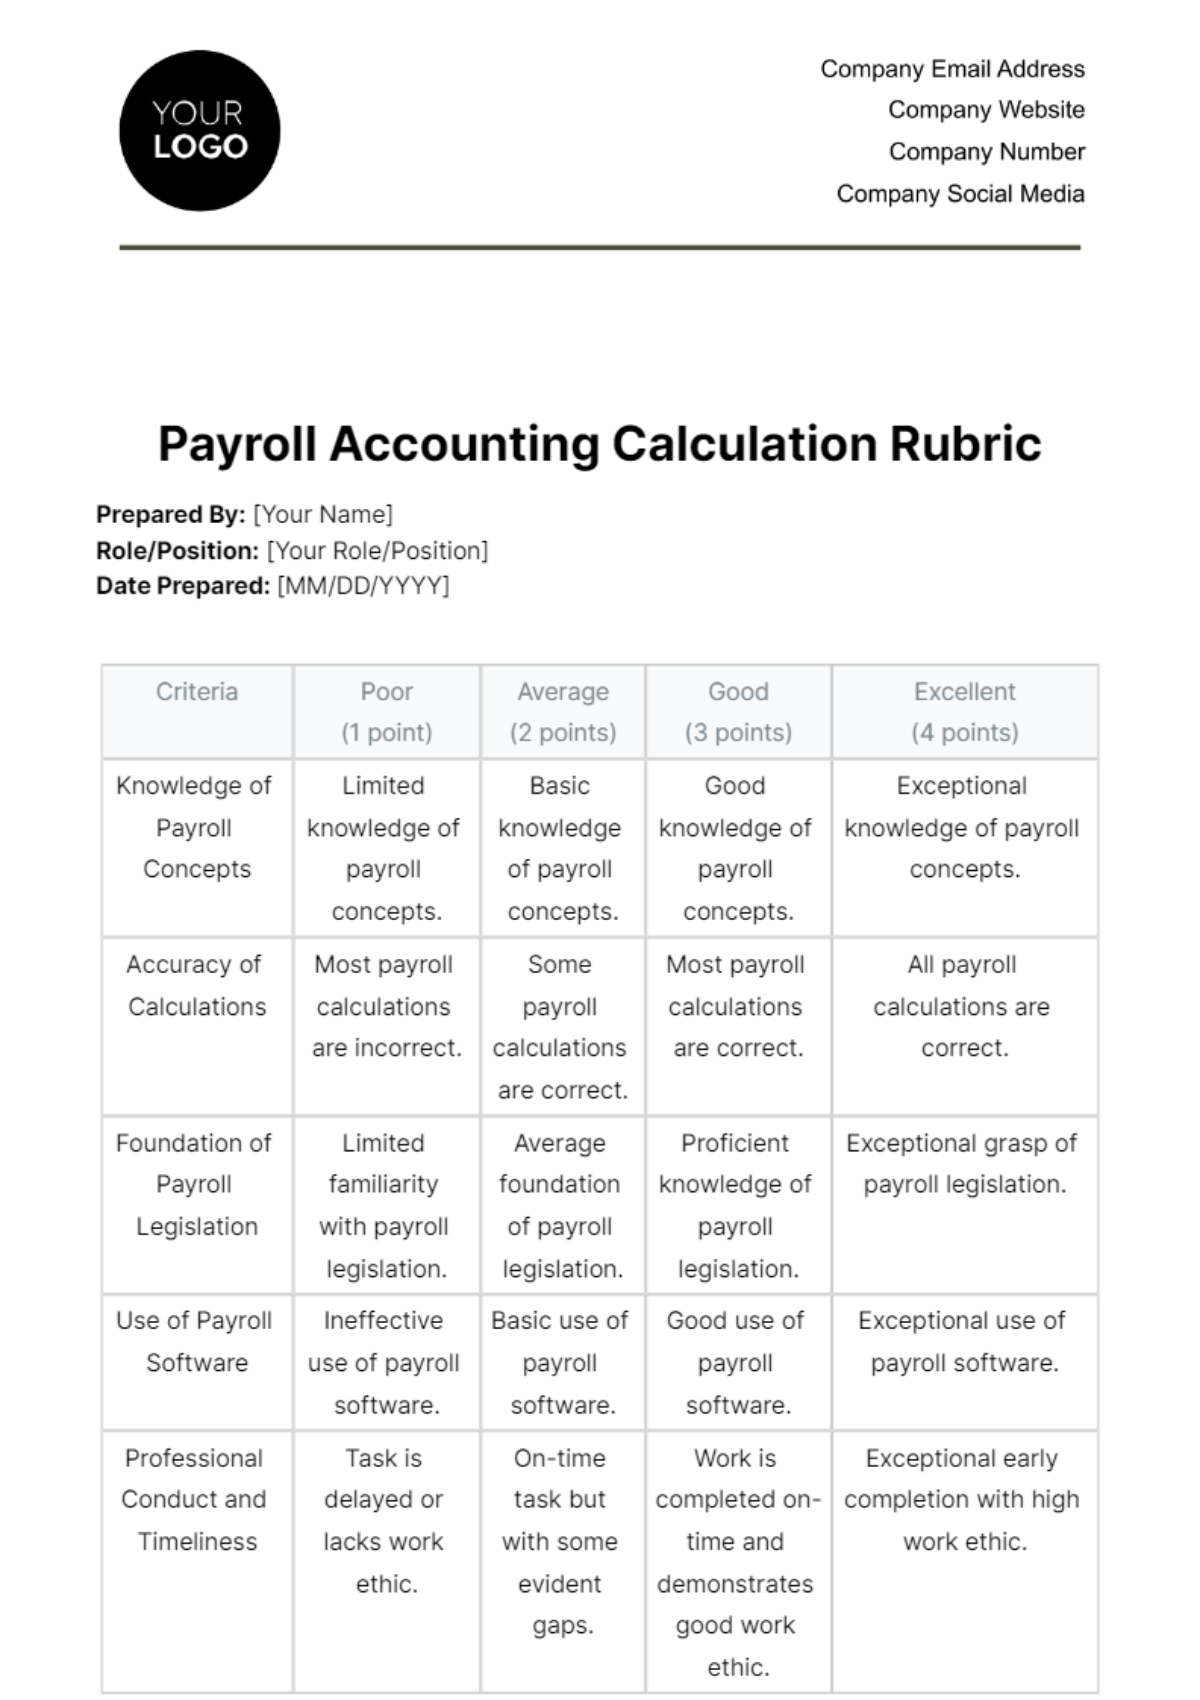 Free Payroll Accounting Calculation Rubric Template